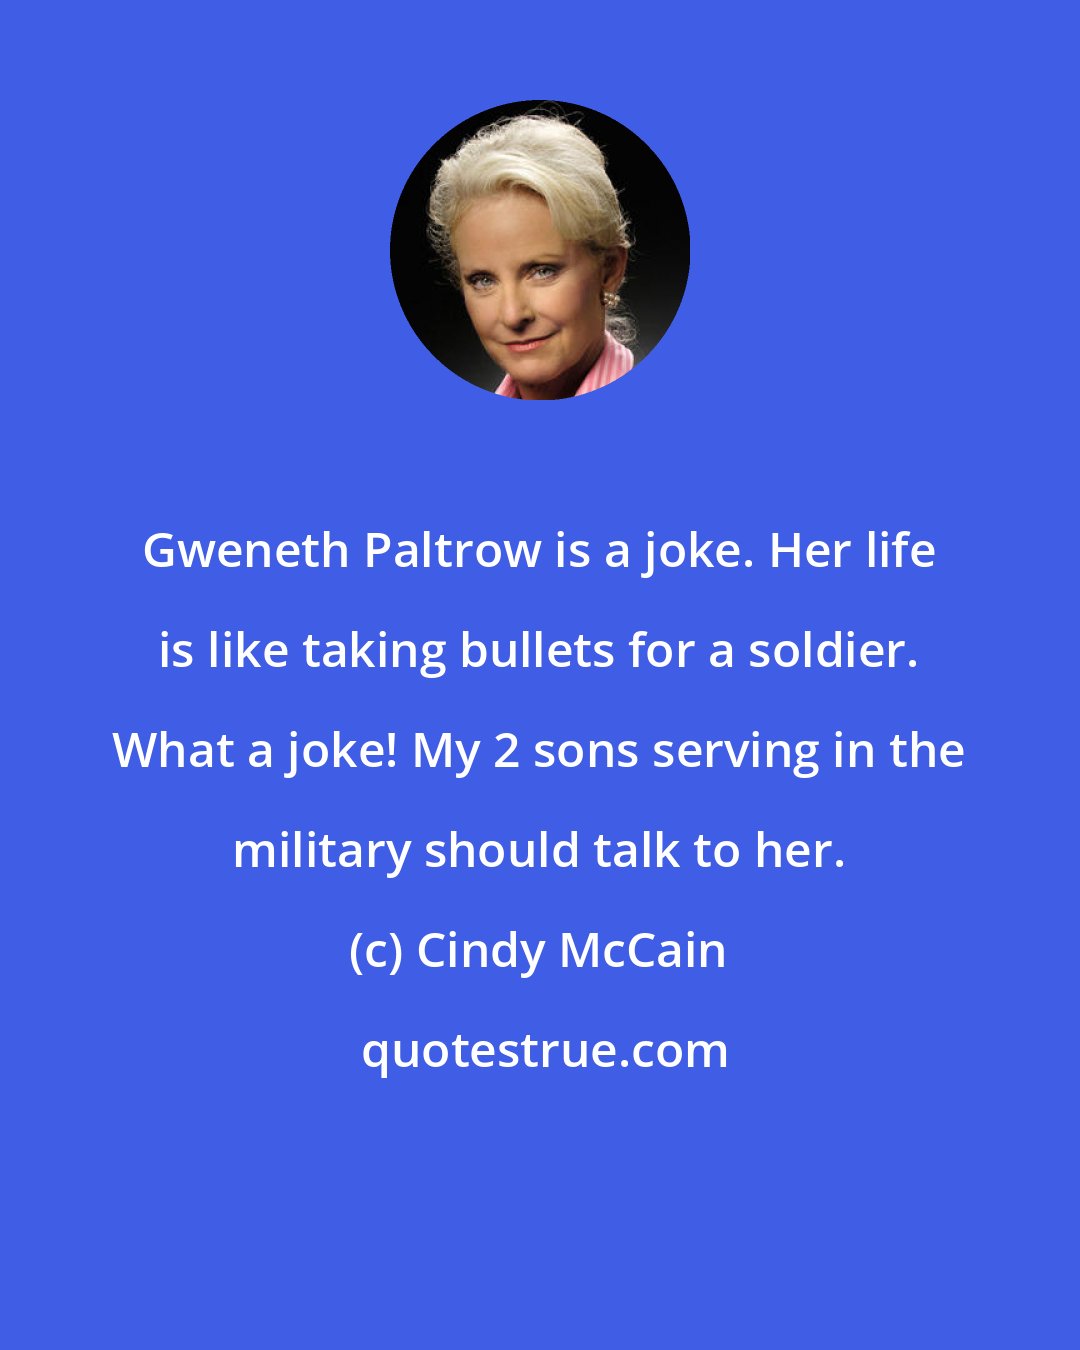 Cindy McCain: Gweneth Paltrow is a joke. Her life is like taking bullets for a soldier. What a joke! My 2 sons serving in the military should talk to her.